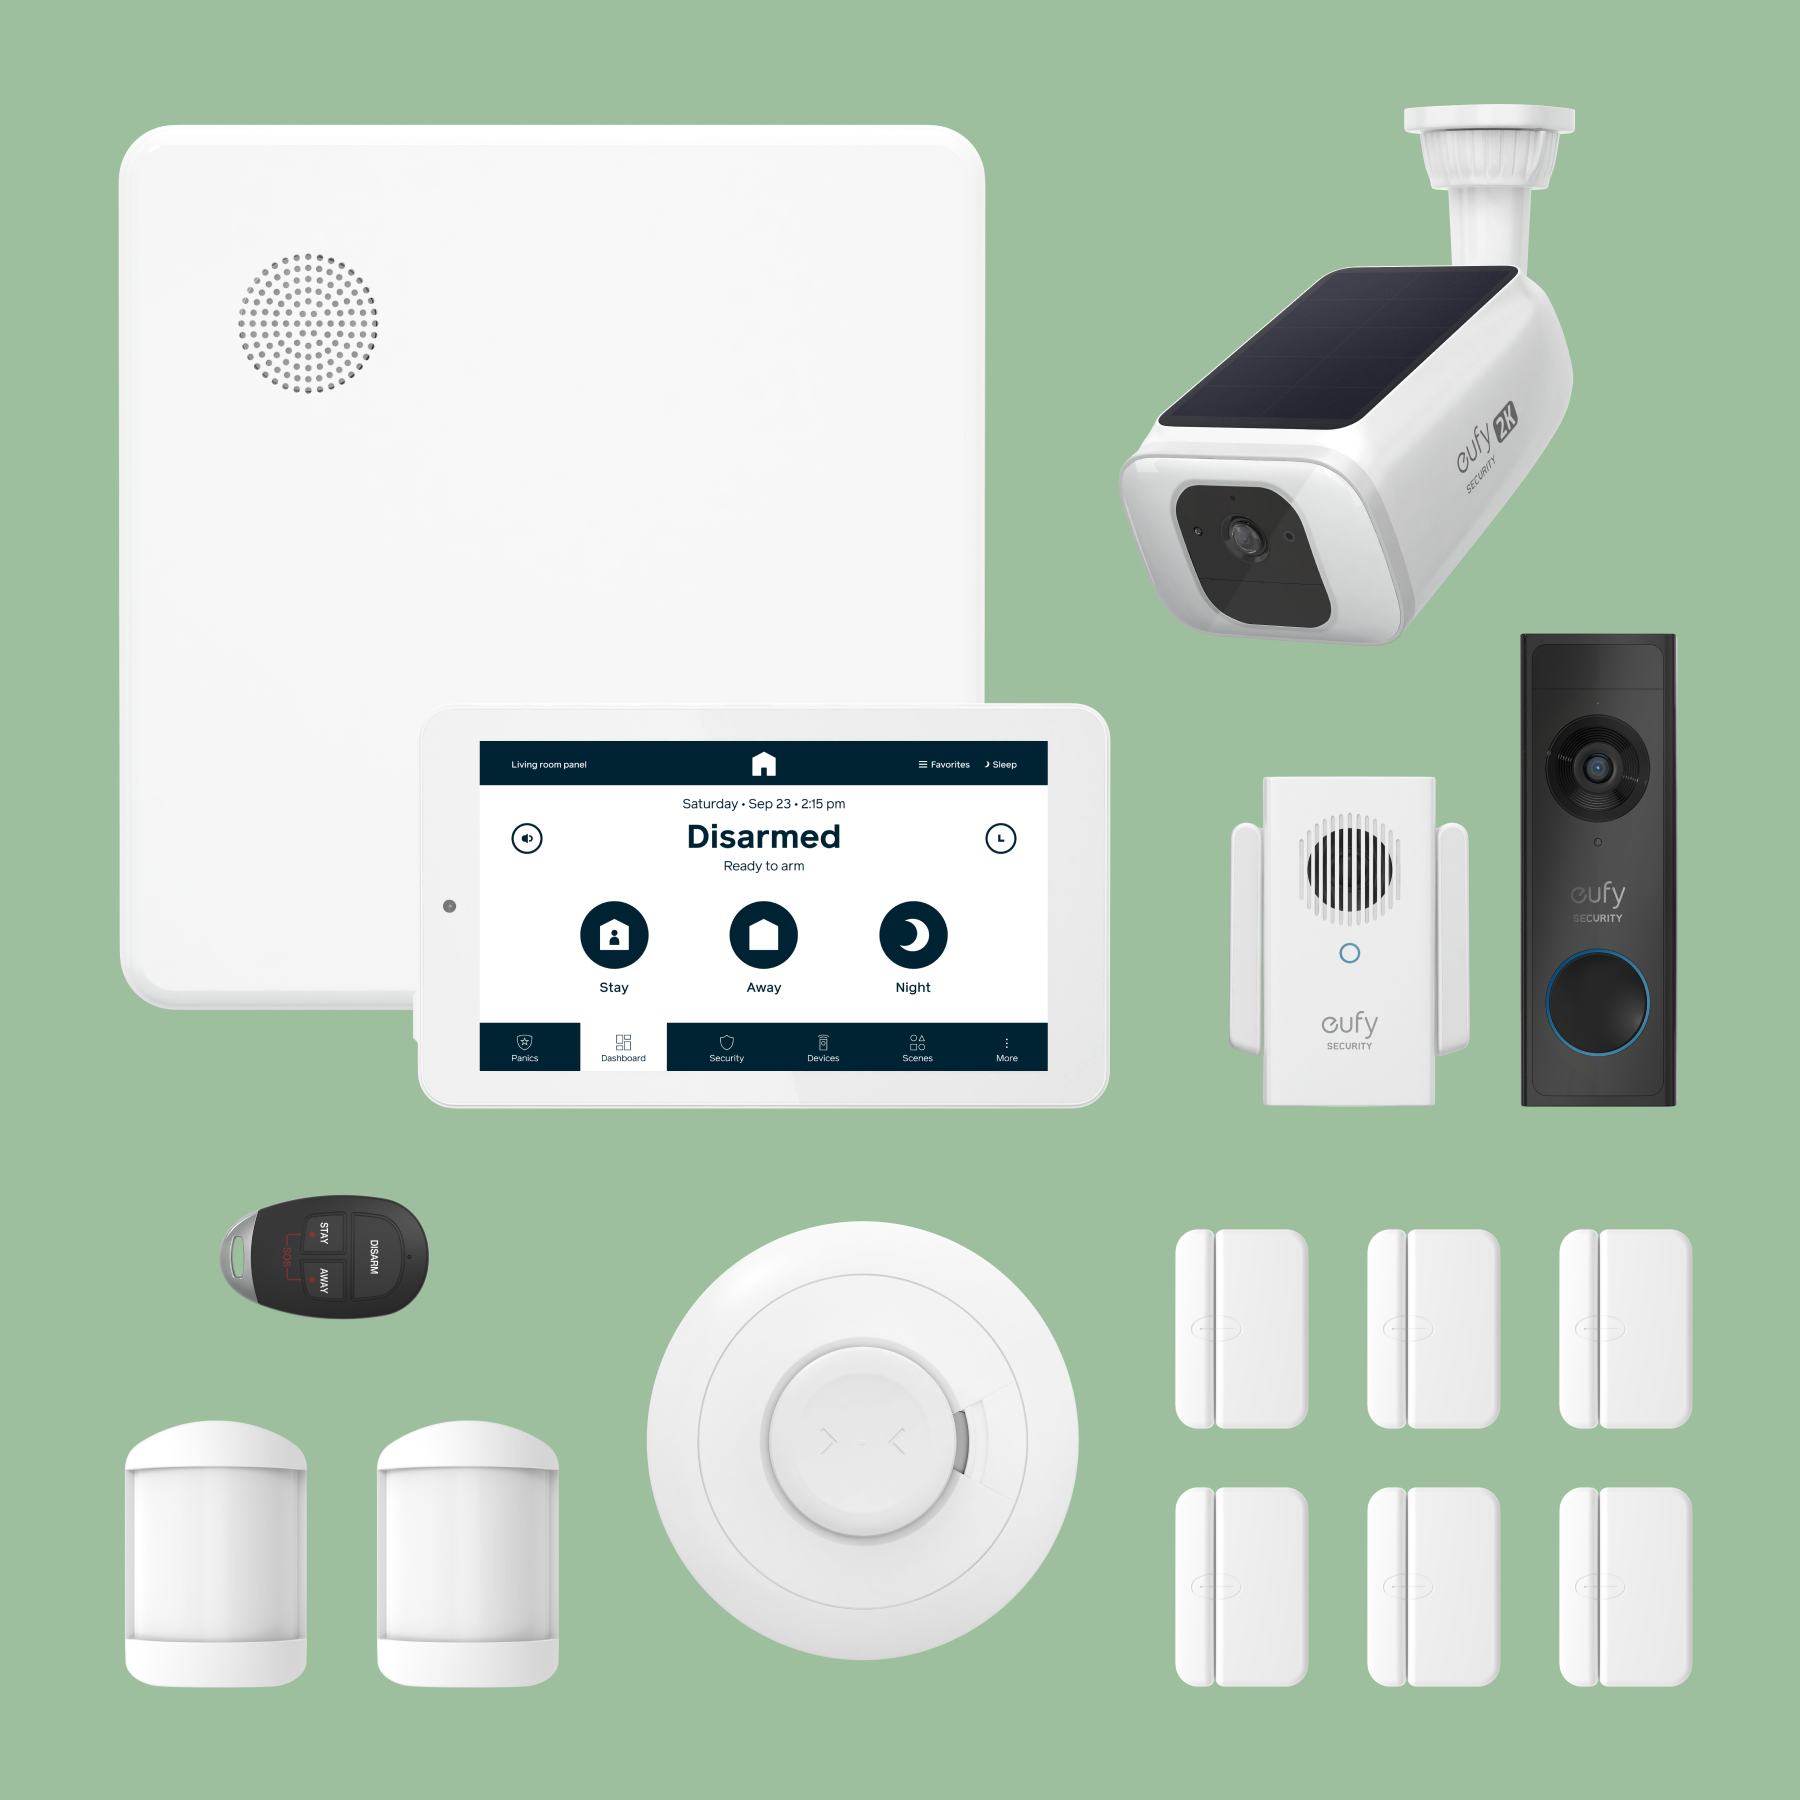 Cove security system with panel, cameras, sensors, doorbell, and siren.